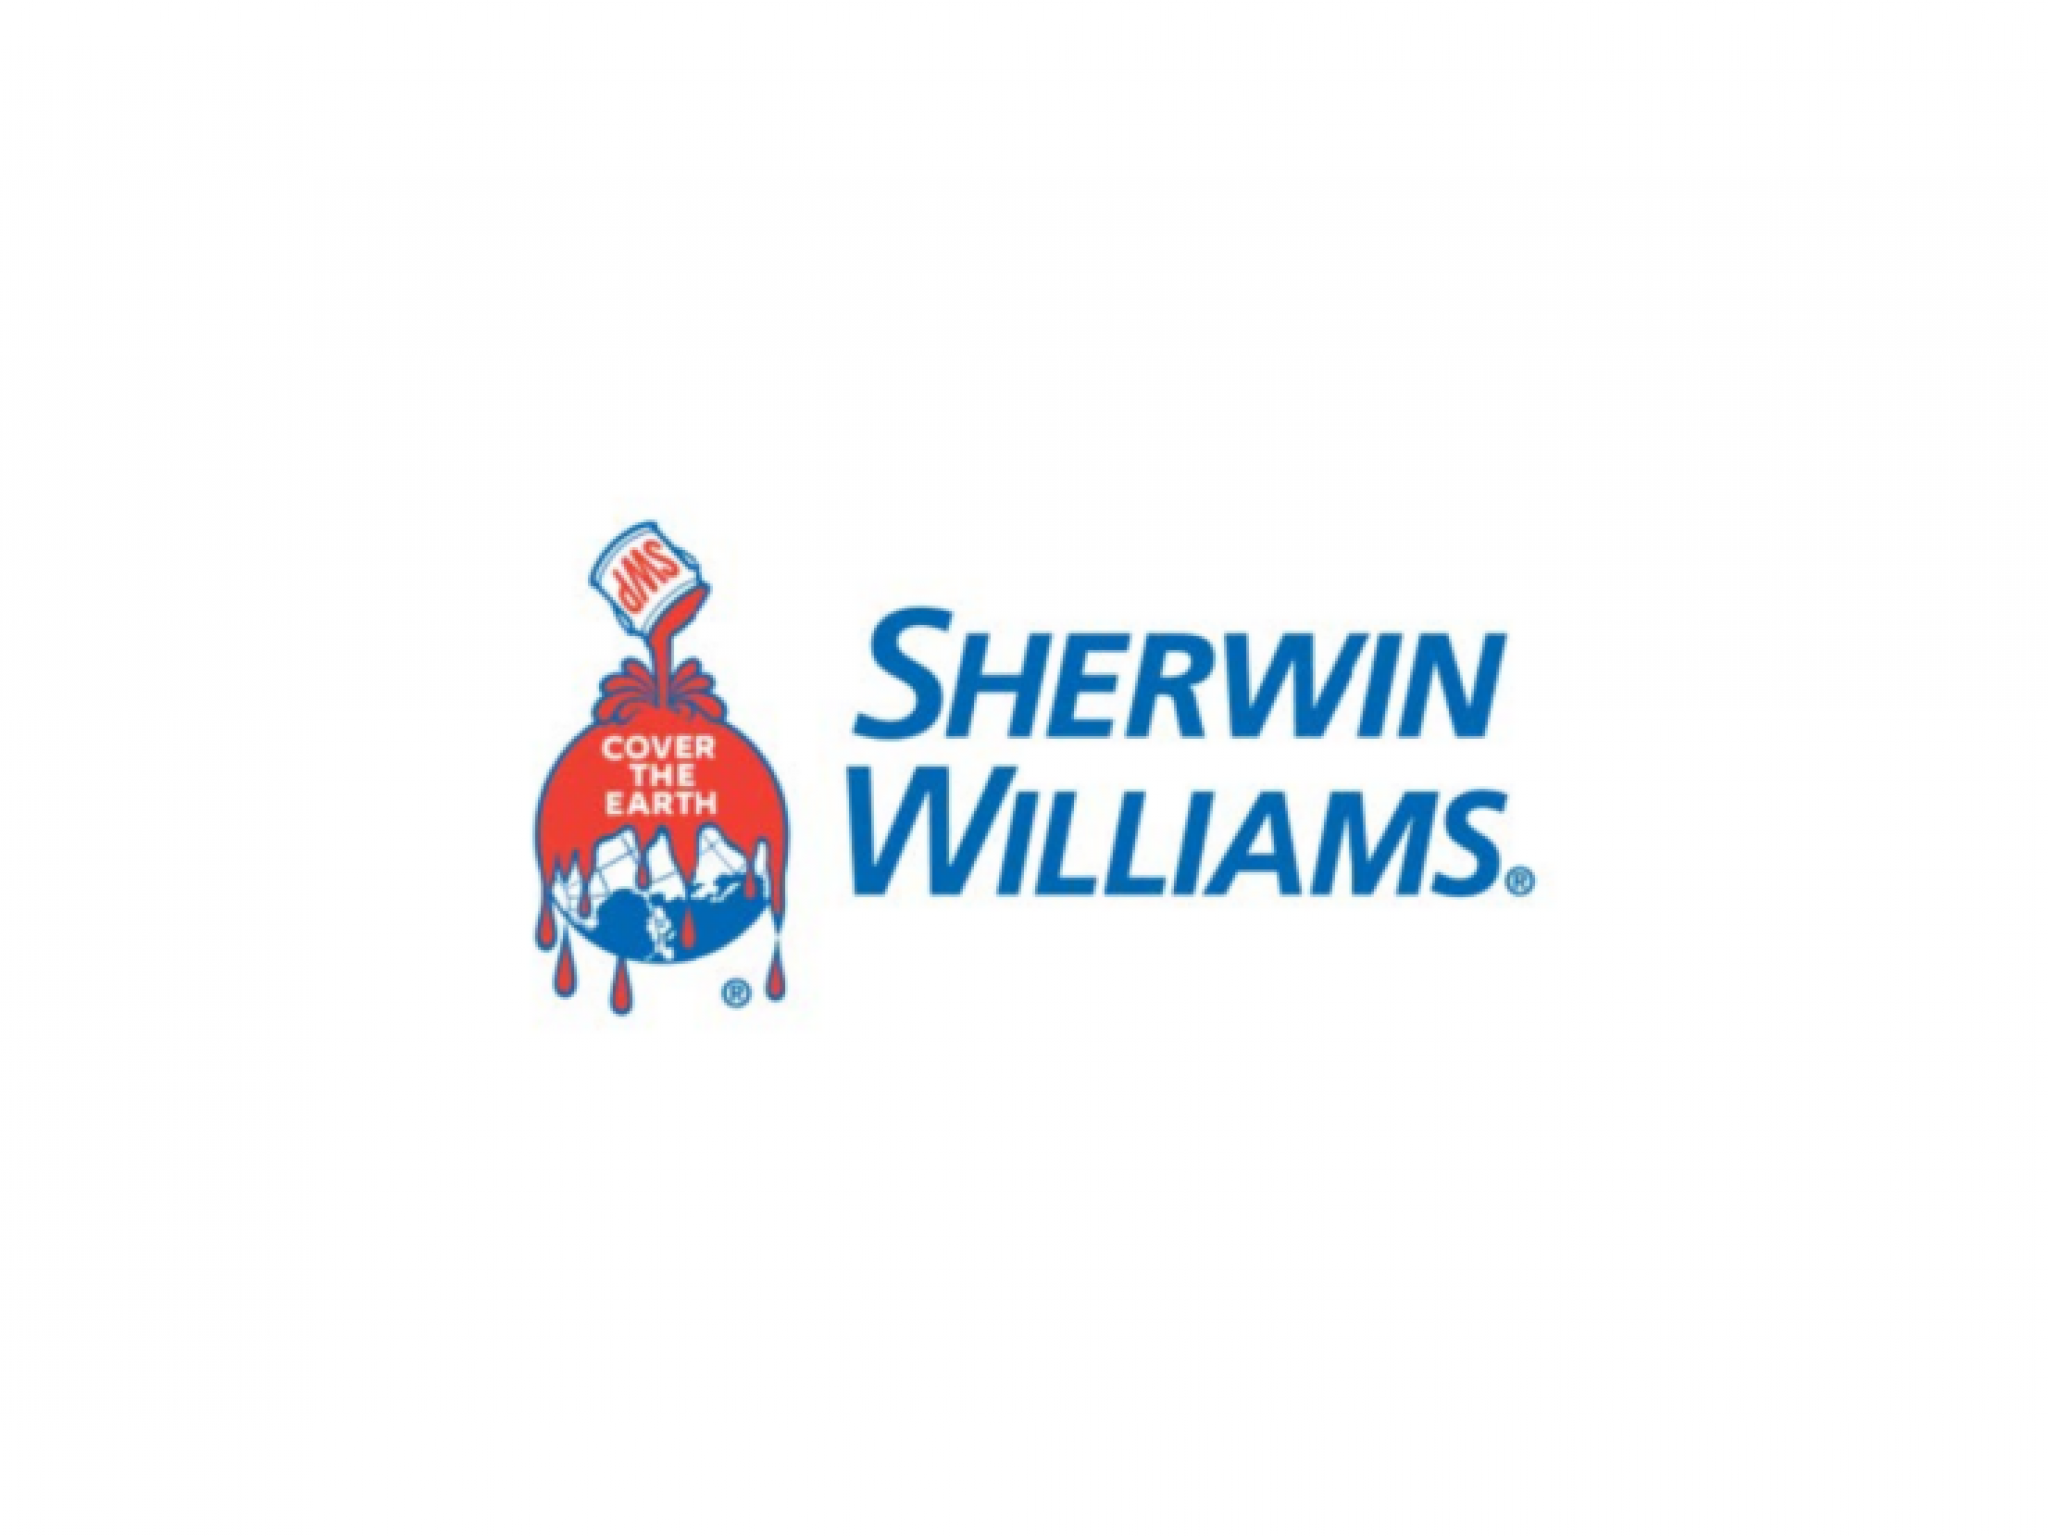  whats-going-on-with-sherwin-williams-shares-after-q1-results 